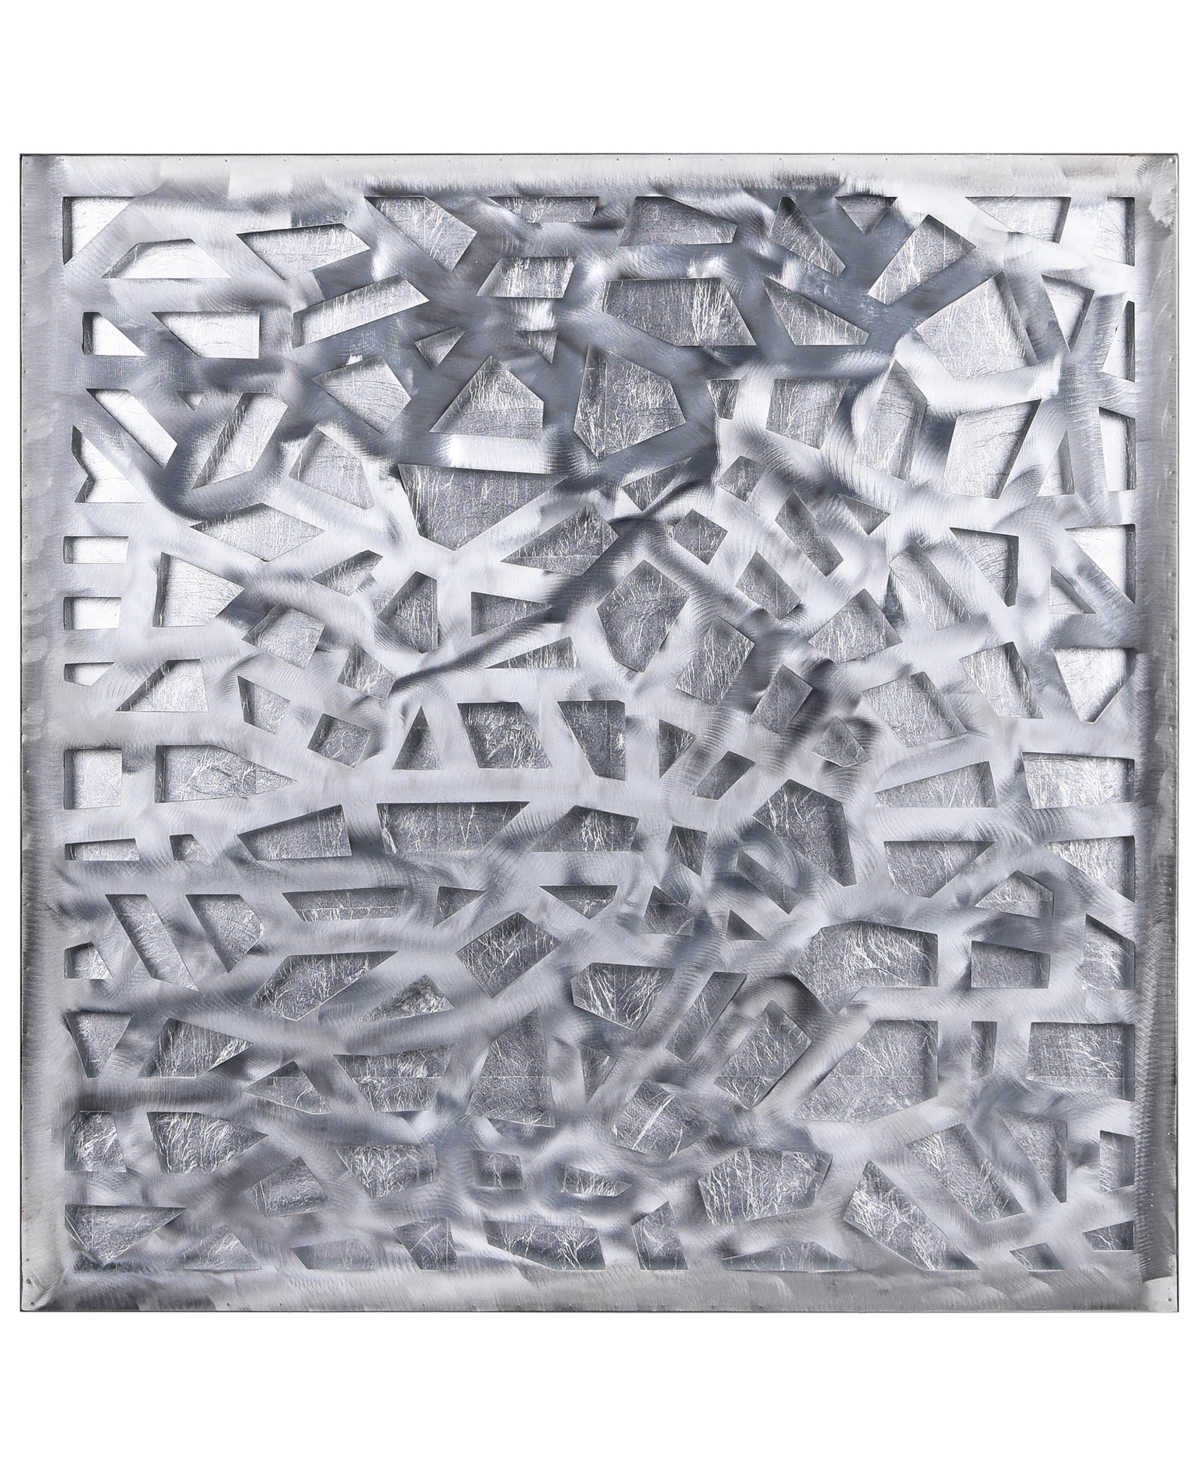 Empire Art Direct Enigma Polished Steel Leaf 3d Abstract Metal Wall Art, 32" X 32" In Silver-tone